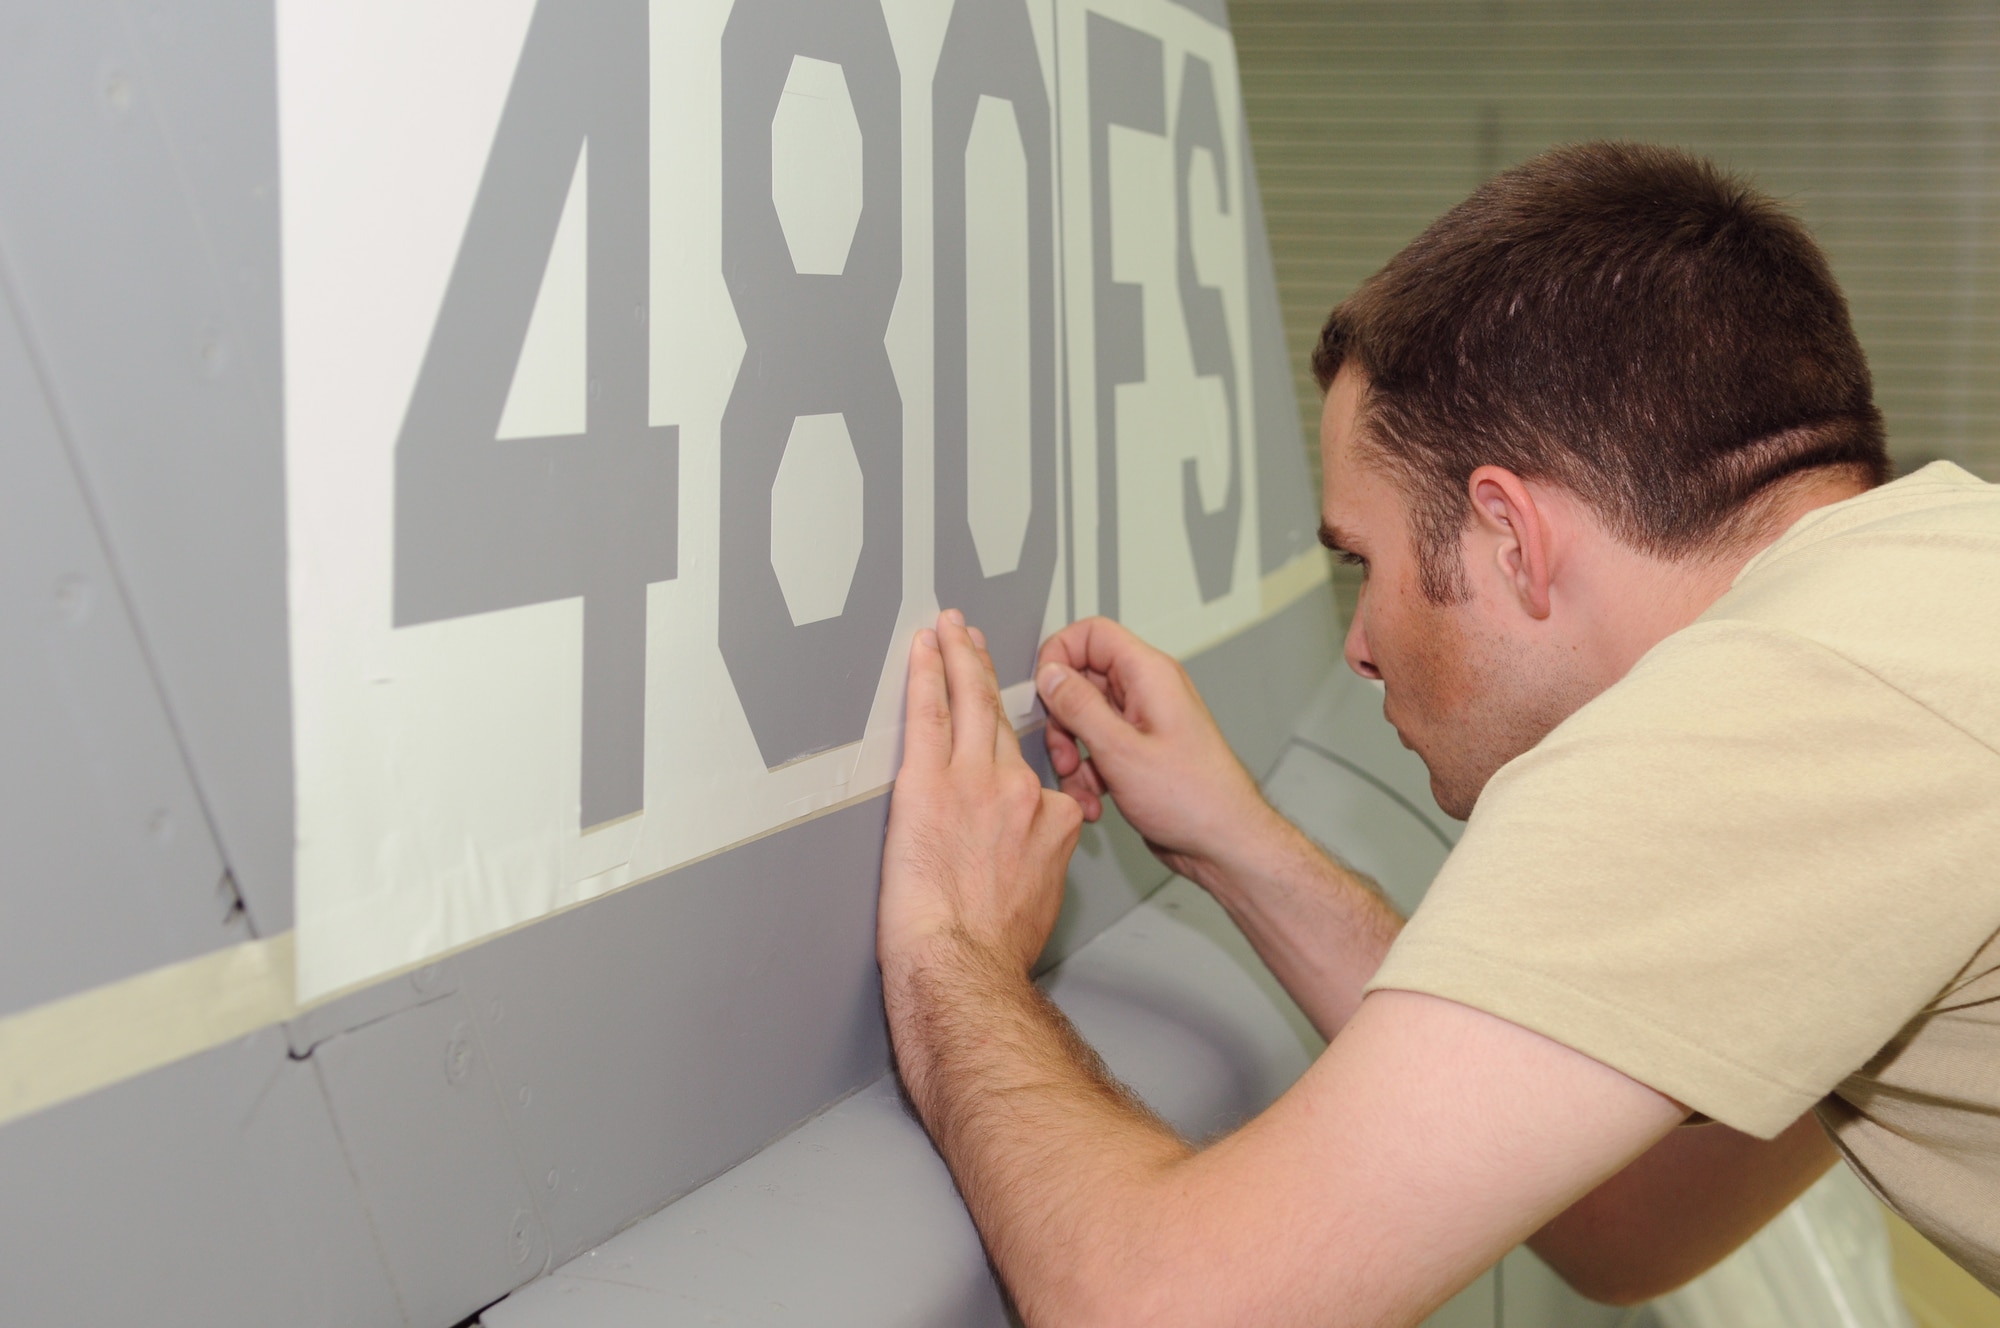 SPANGDAHLEM AIR BASE, Germany -- Senior Airman William Parker, 52nd Equipment Maintenance Squadron aircraft structural maintenance journeyman, applies a stencil on the 480th Fighter Squadron’s flag ship, an F-16 Fighting Falcon, Aug 8. The aircraft’s tail flash was painted in preparation for the reactivation of the 480th FS on Aug 13. (U.S. Air Force photo/Staff Sgt. Benjamin Wilson)